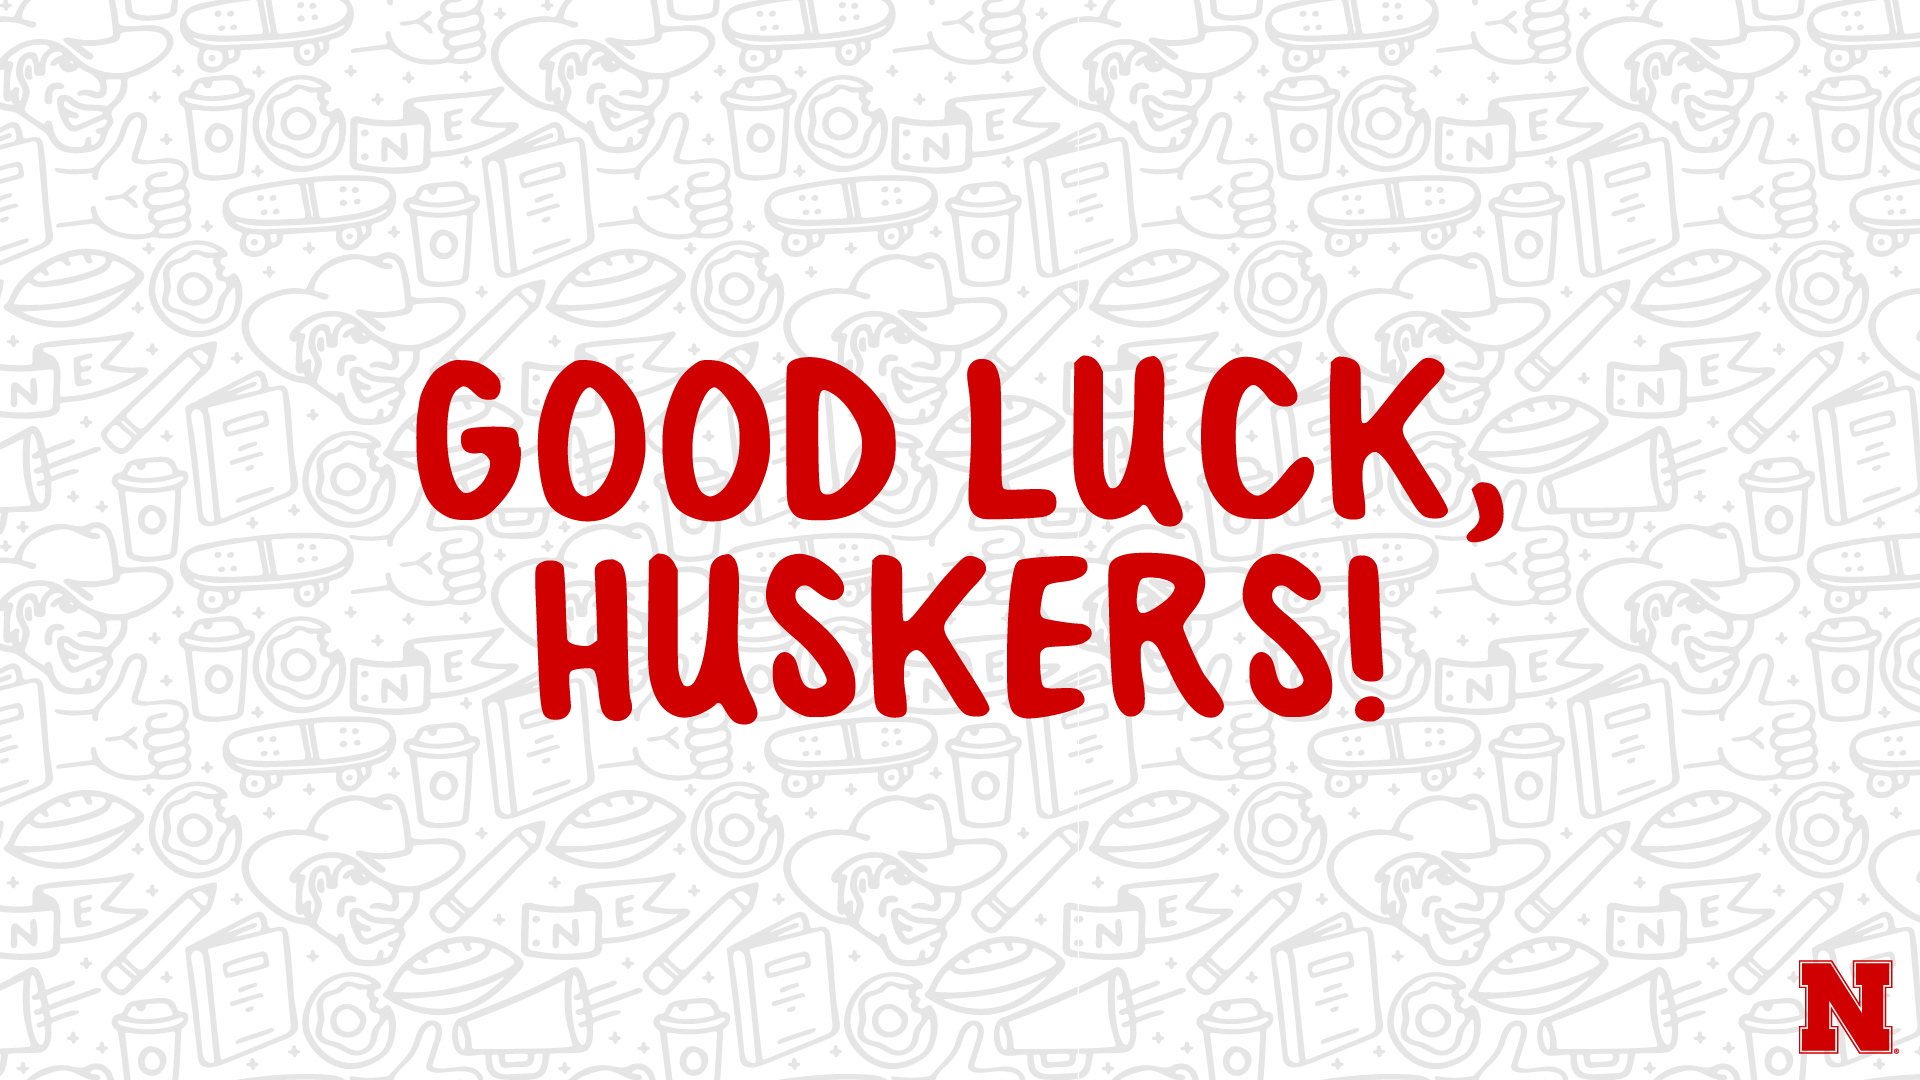 Finish Strong Huskers!